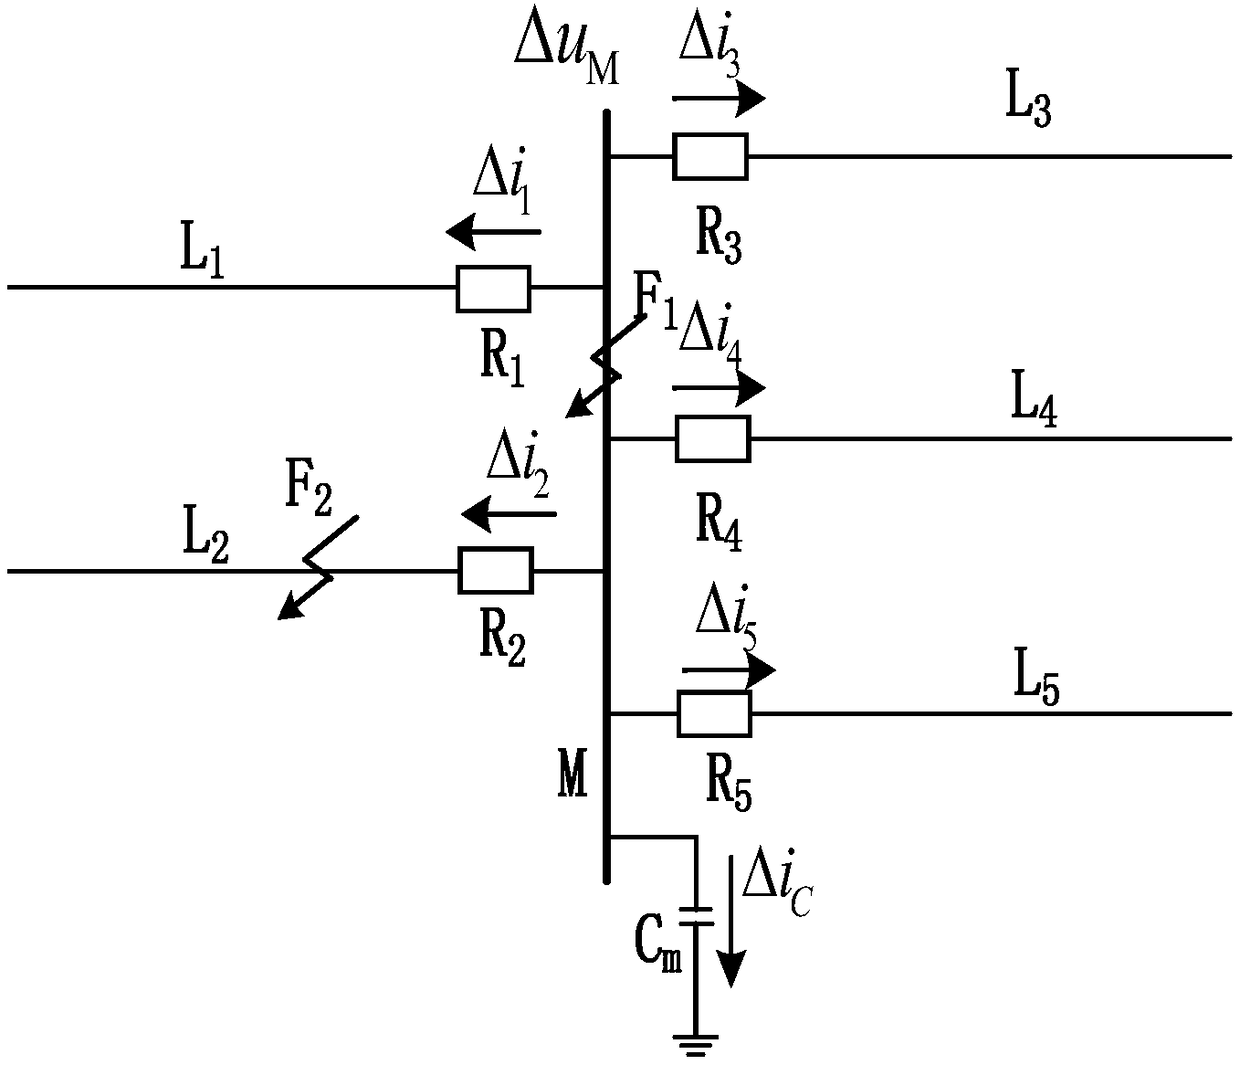 Rapid bus protection method based on comparison of similarity of contrary motion waveforms